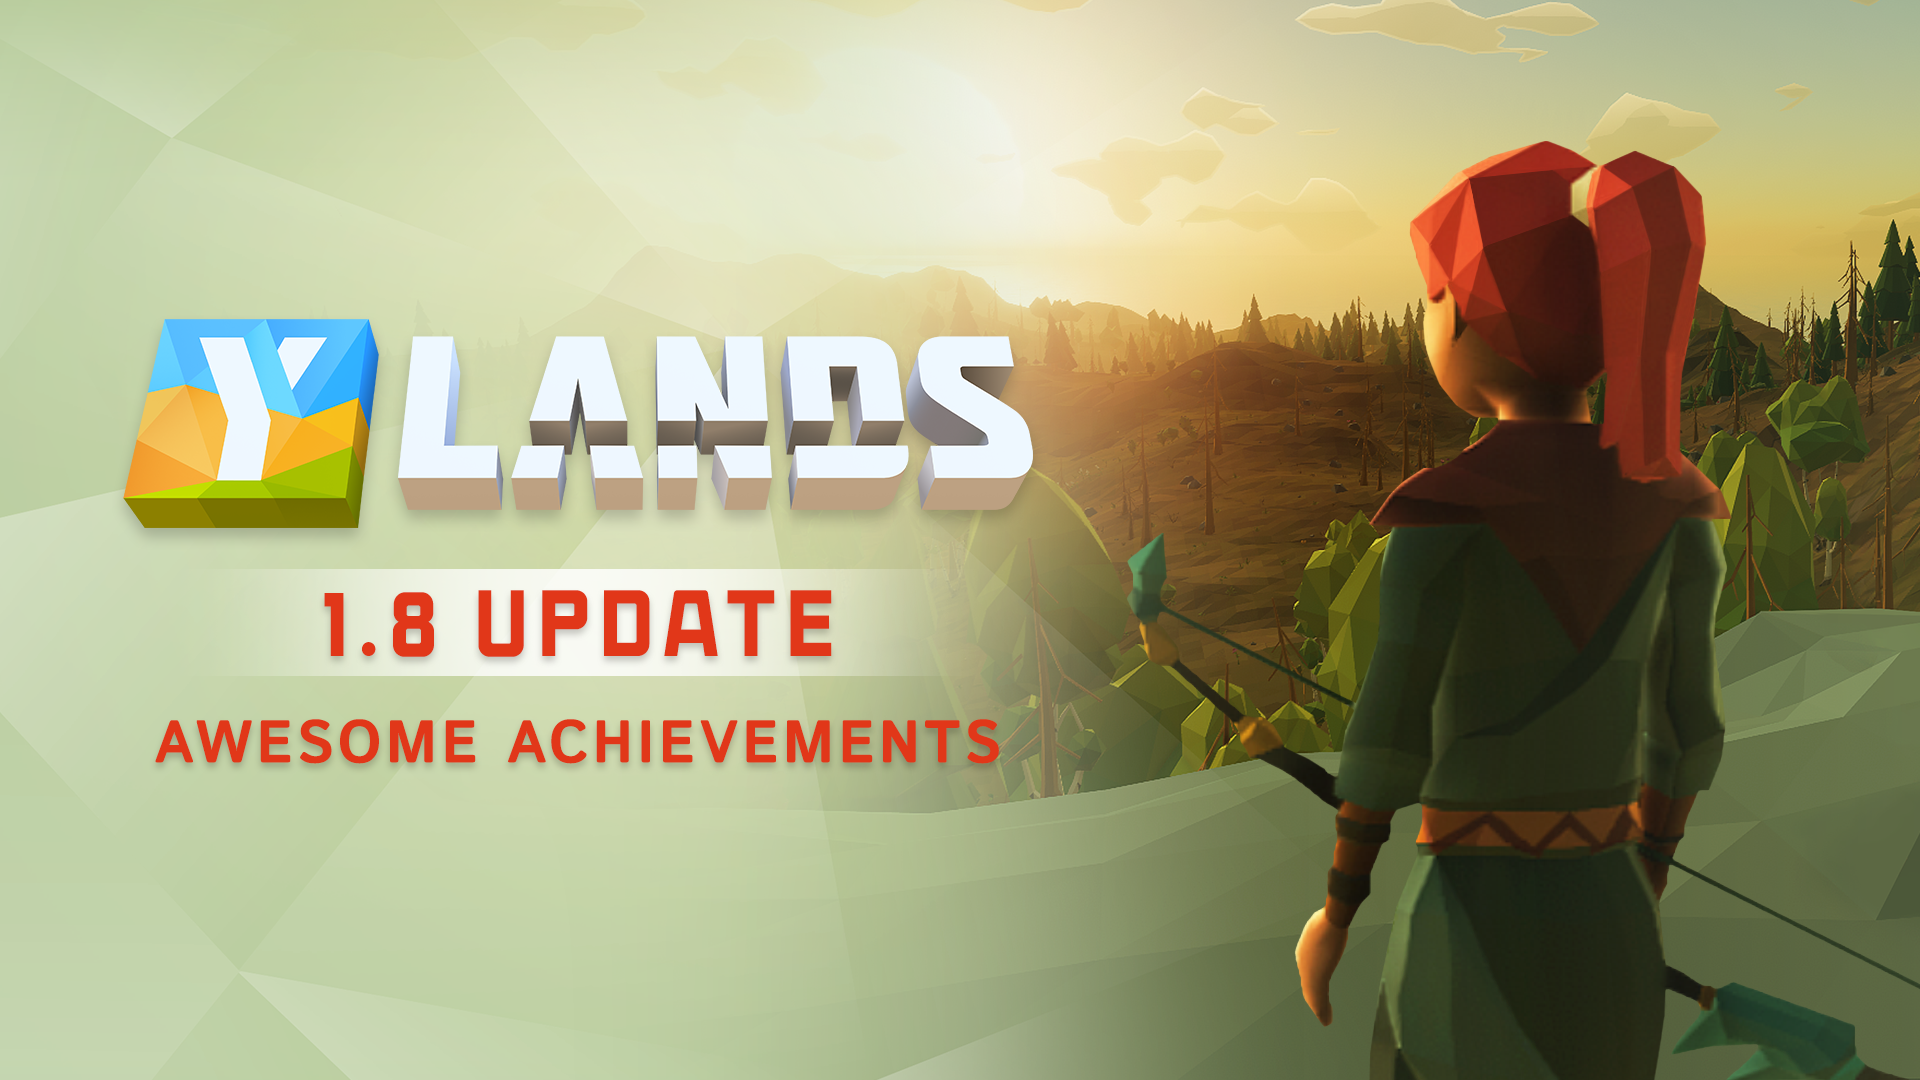 Update 1.8: AWESOME ACHIEVEMENTS - General Discussion - Ylands